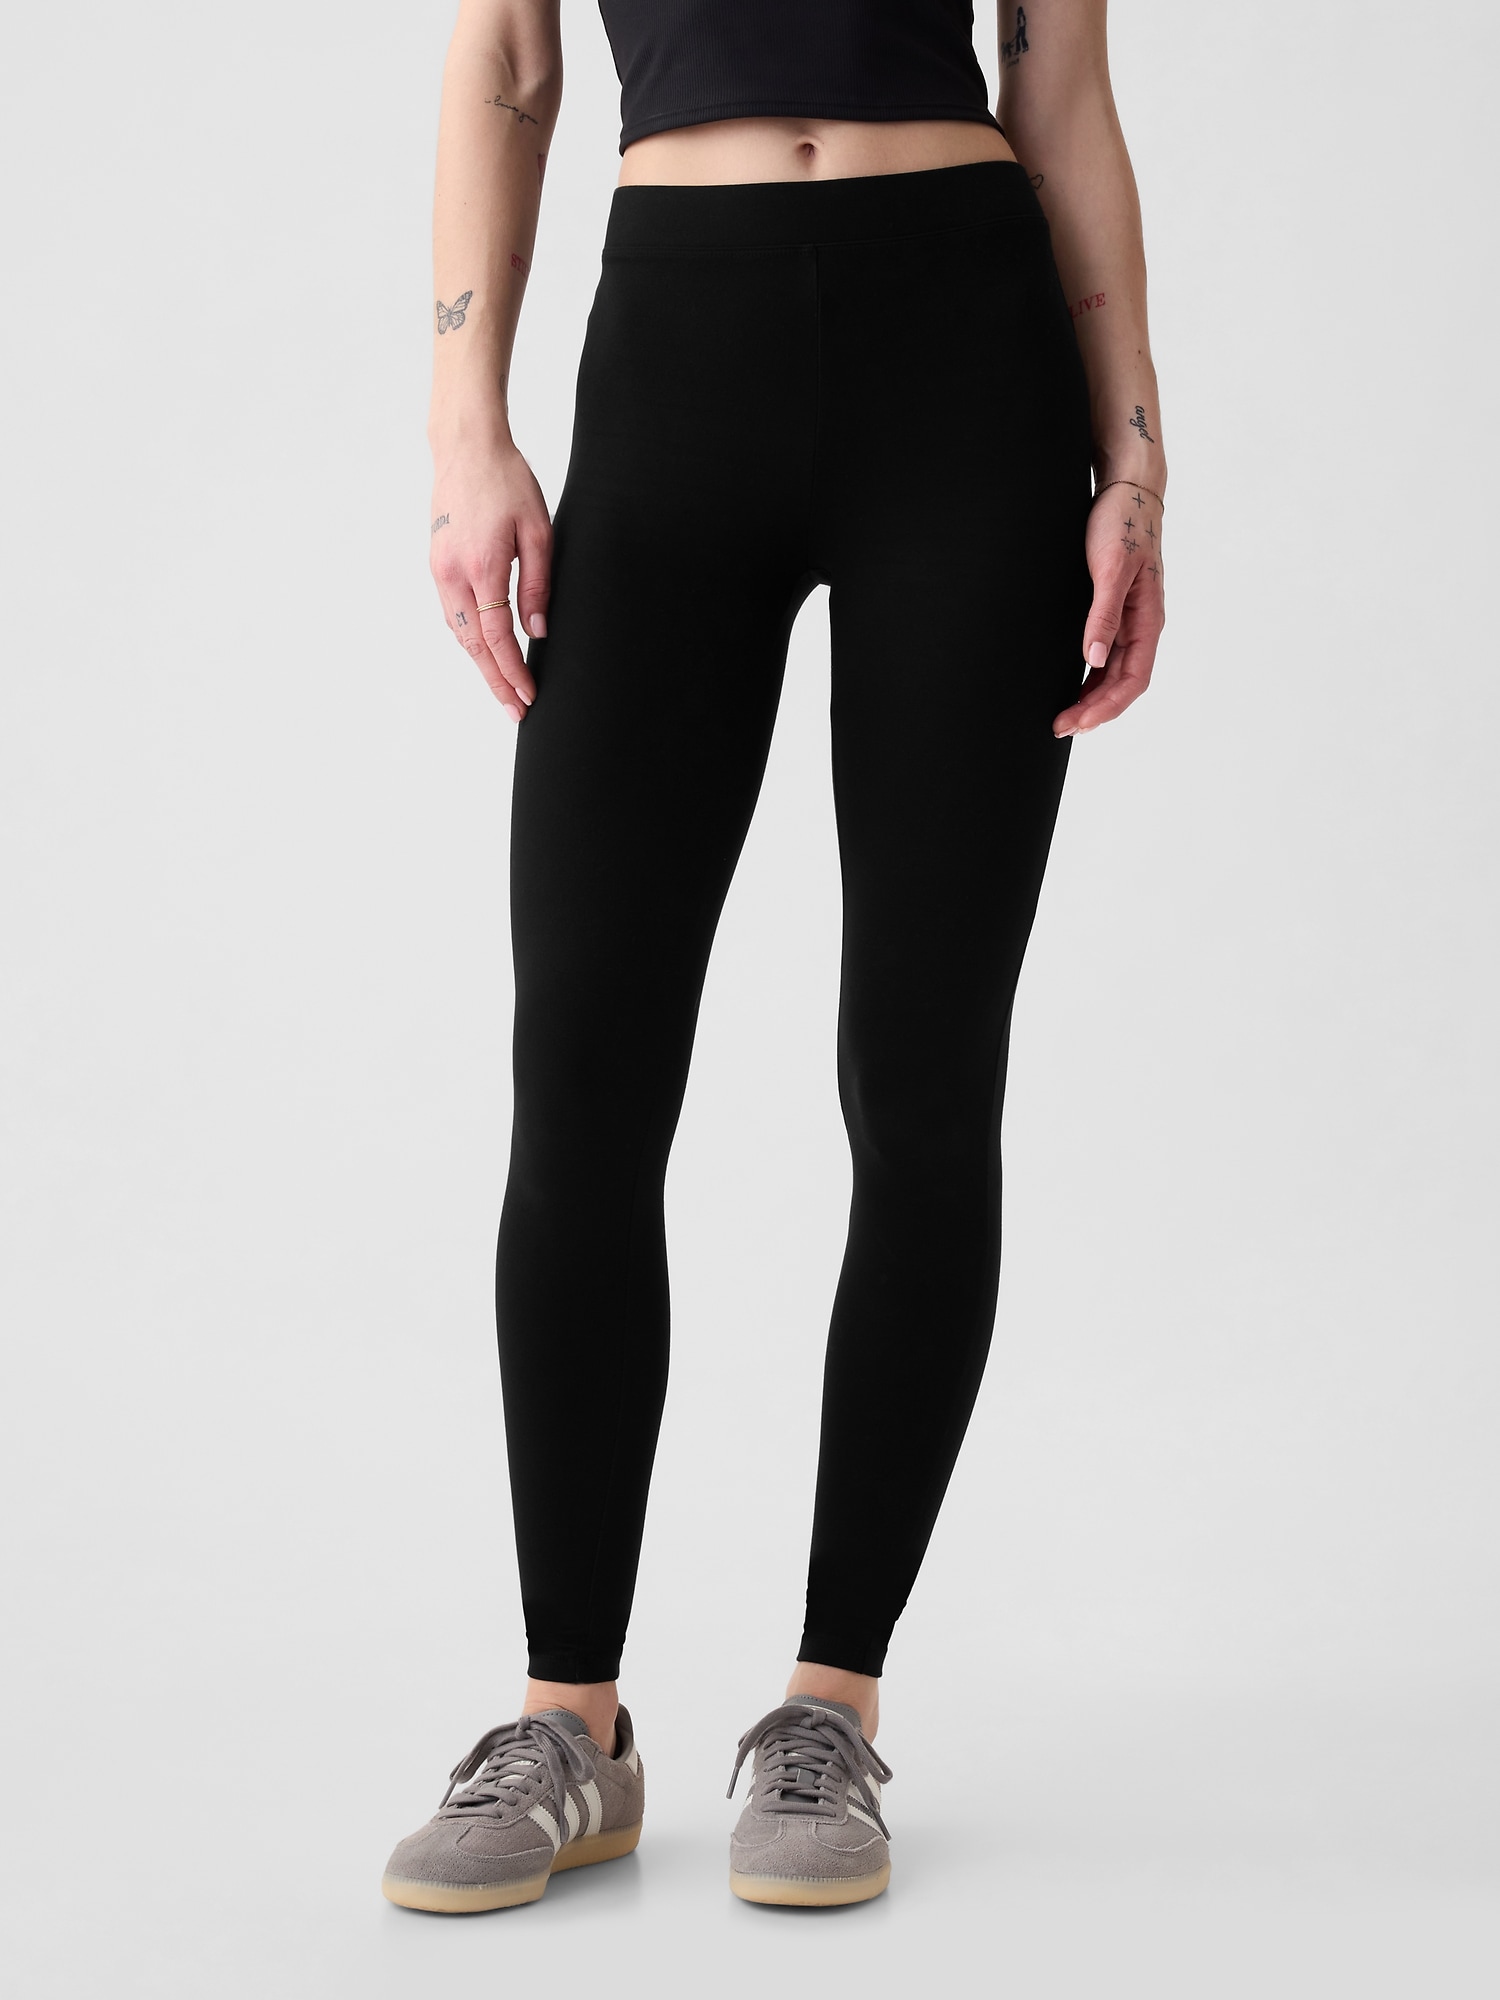 PREEGO Casual Ankle length Leggings Combo of 2